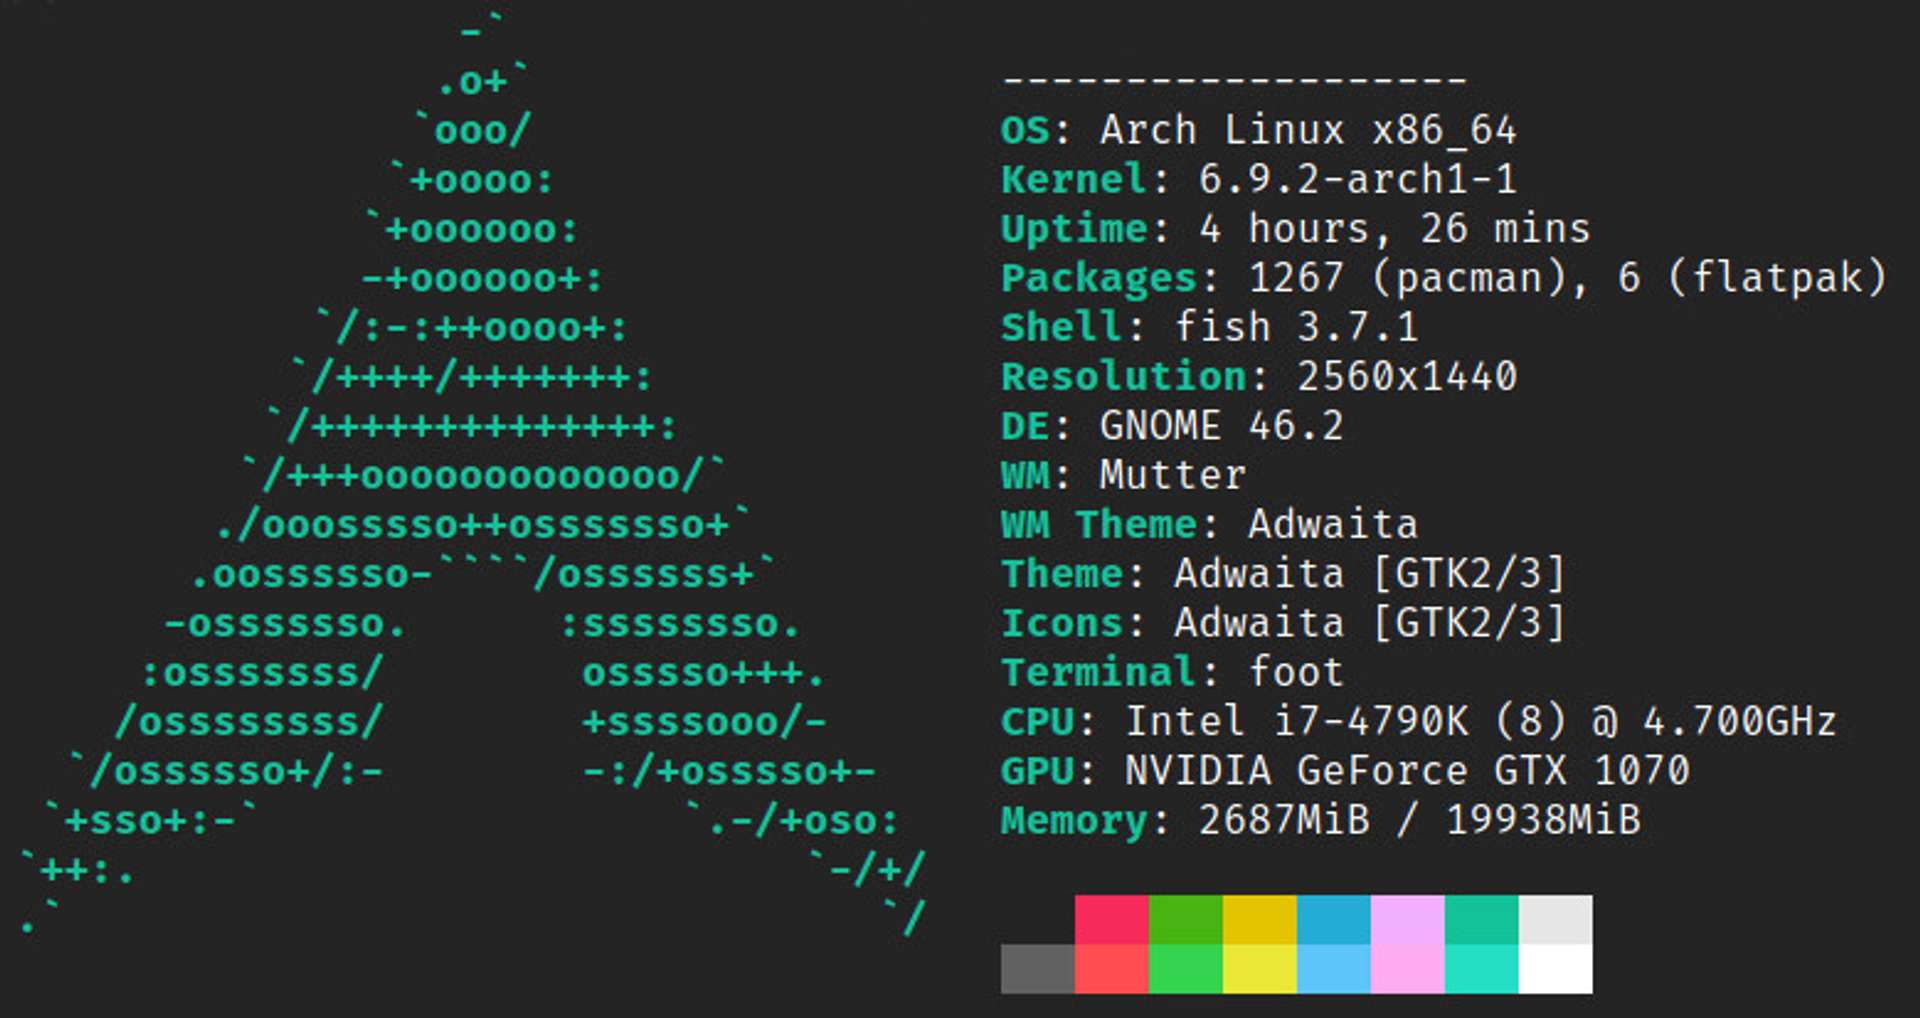 /img/arch-linux/arch-linux-neofetch.jpg